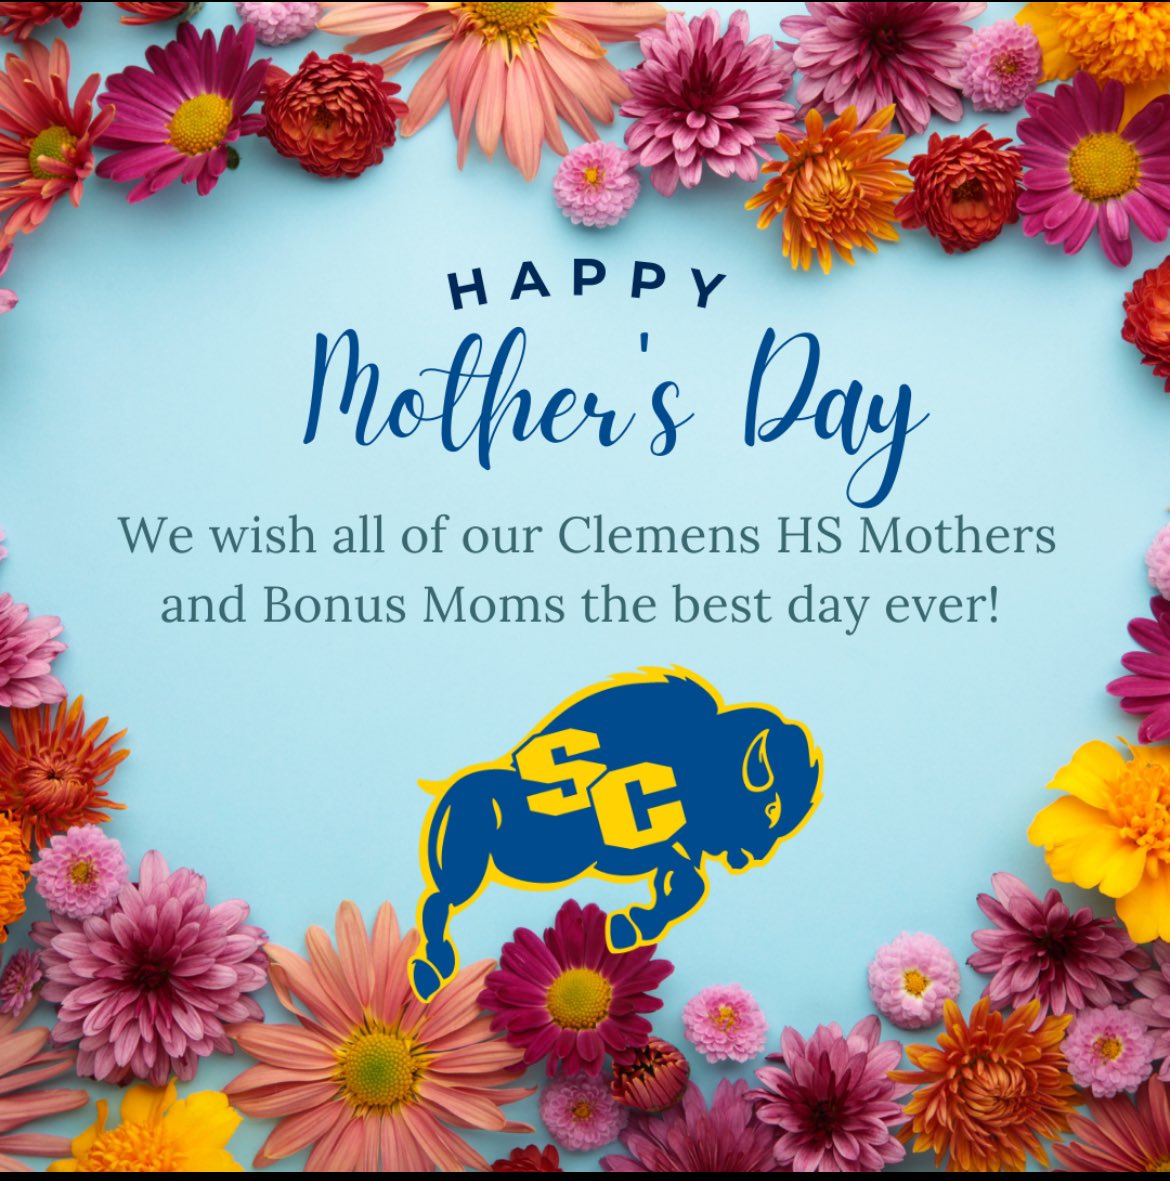 We hope all of our Clemens HS Moms and Bonus Moms have the best Mother’s Day ever!! 🌹🌸🌻🌷🌼💐 @SCUCISD @scbuffalostrong @MightyBuffBand @TX82ndAFJROTC @ClemensASBC @MsASirizzotti